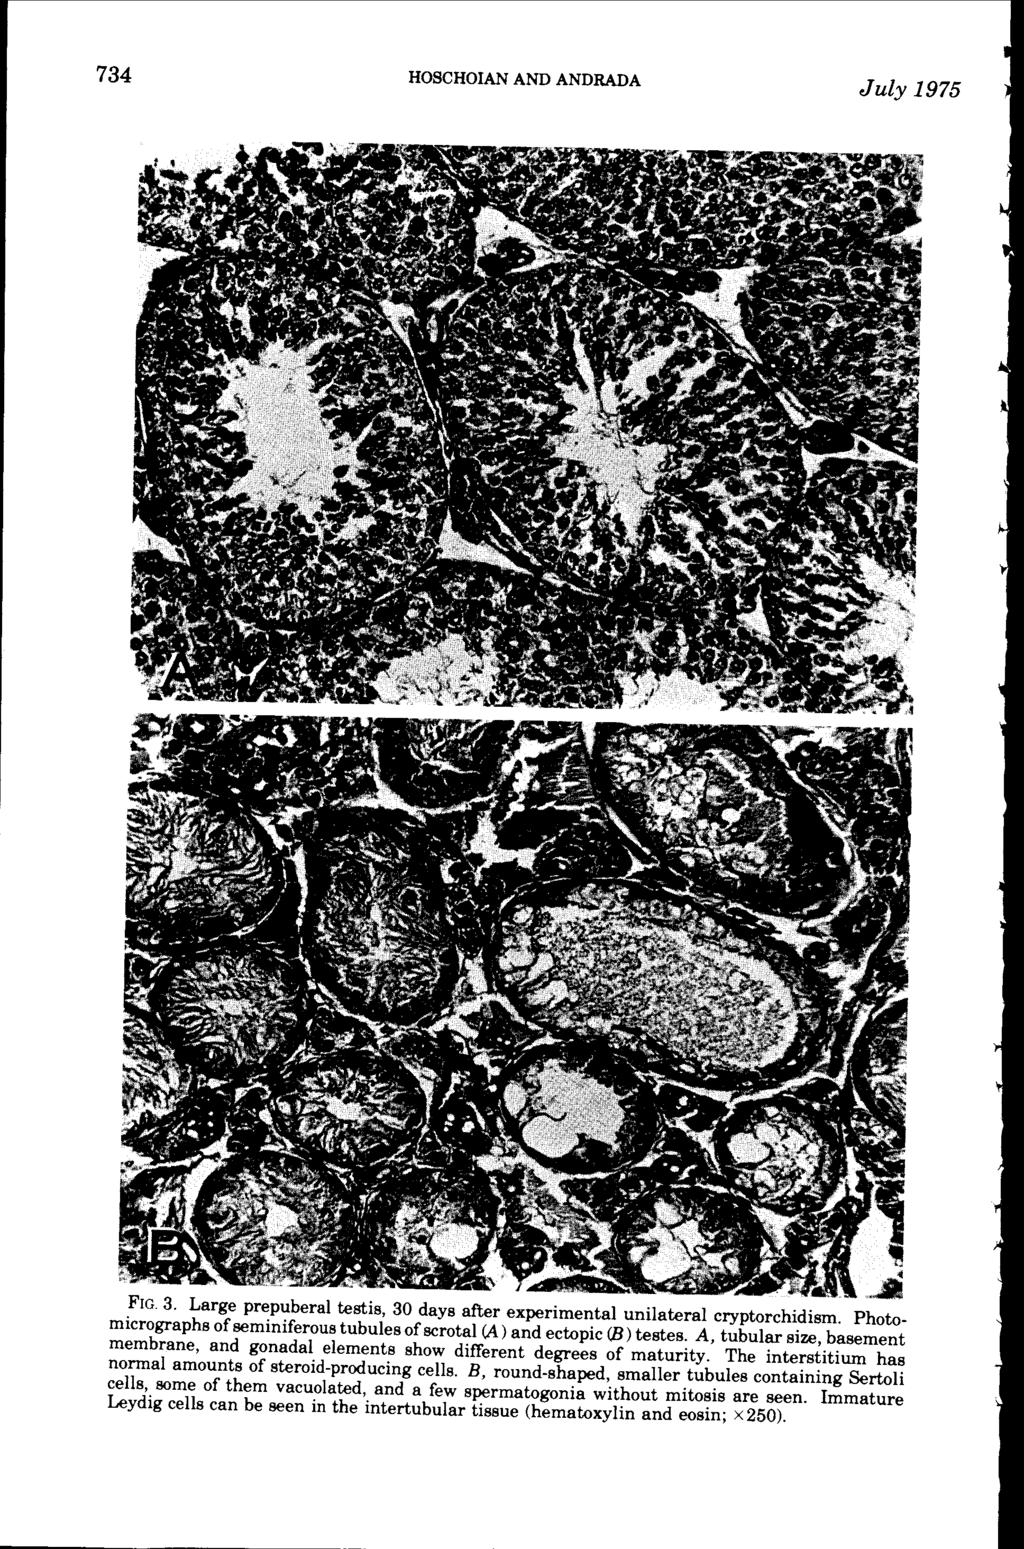 734 HOSCHOIAN AND ANDRADA July 1975 FIG. 3. Large prepuberal testis, 30 days after experimental unilateral cryptorchidism.